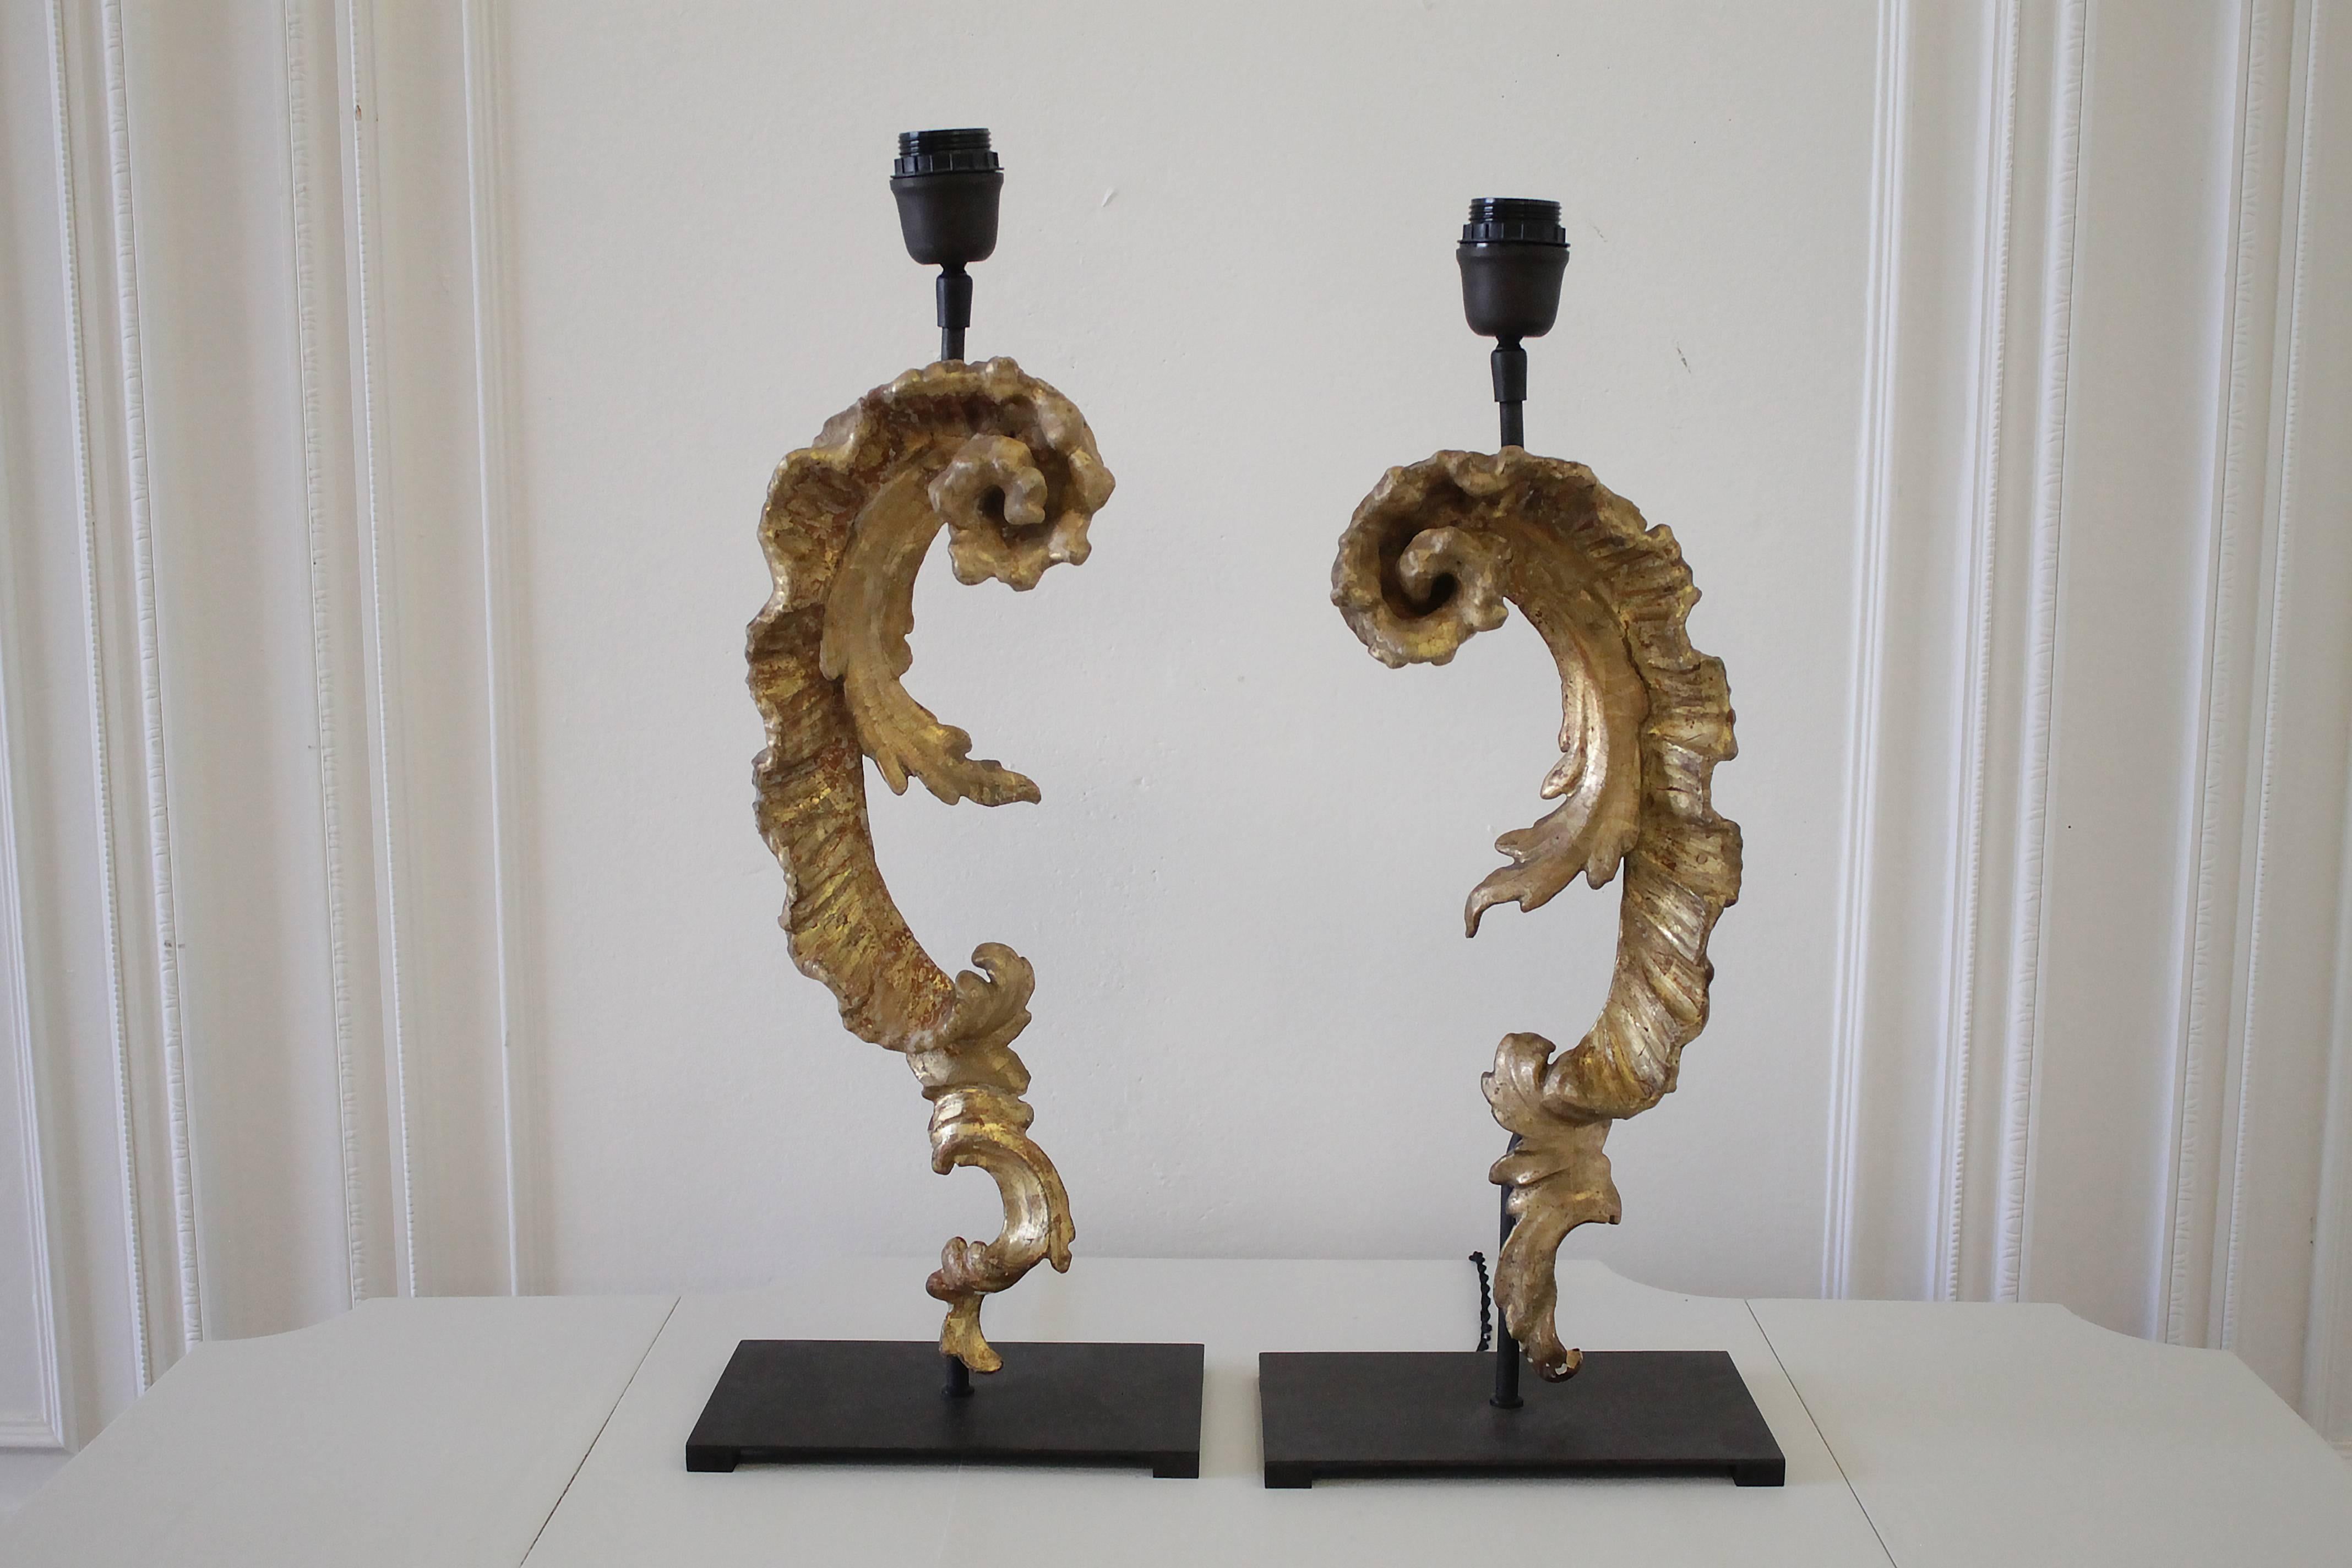 Beautiful pair of French scroll fragment lamps, mounted on dark metal bases.
Delicate gilded scrolls, each carved similar but still unique. 
Lamp #1 measures 21.25